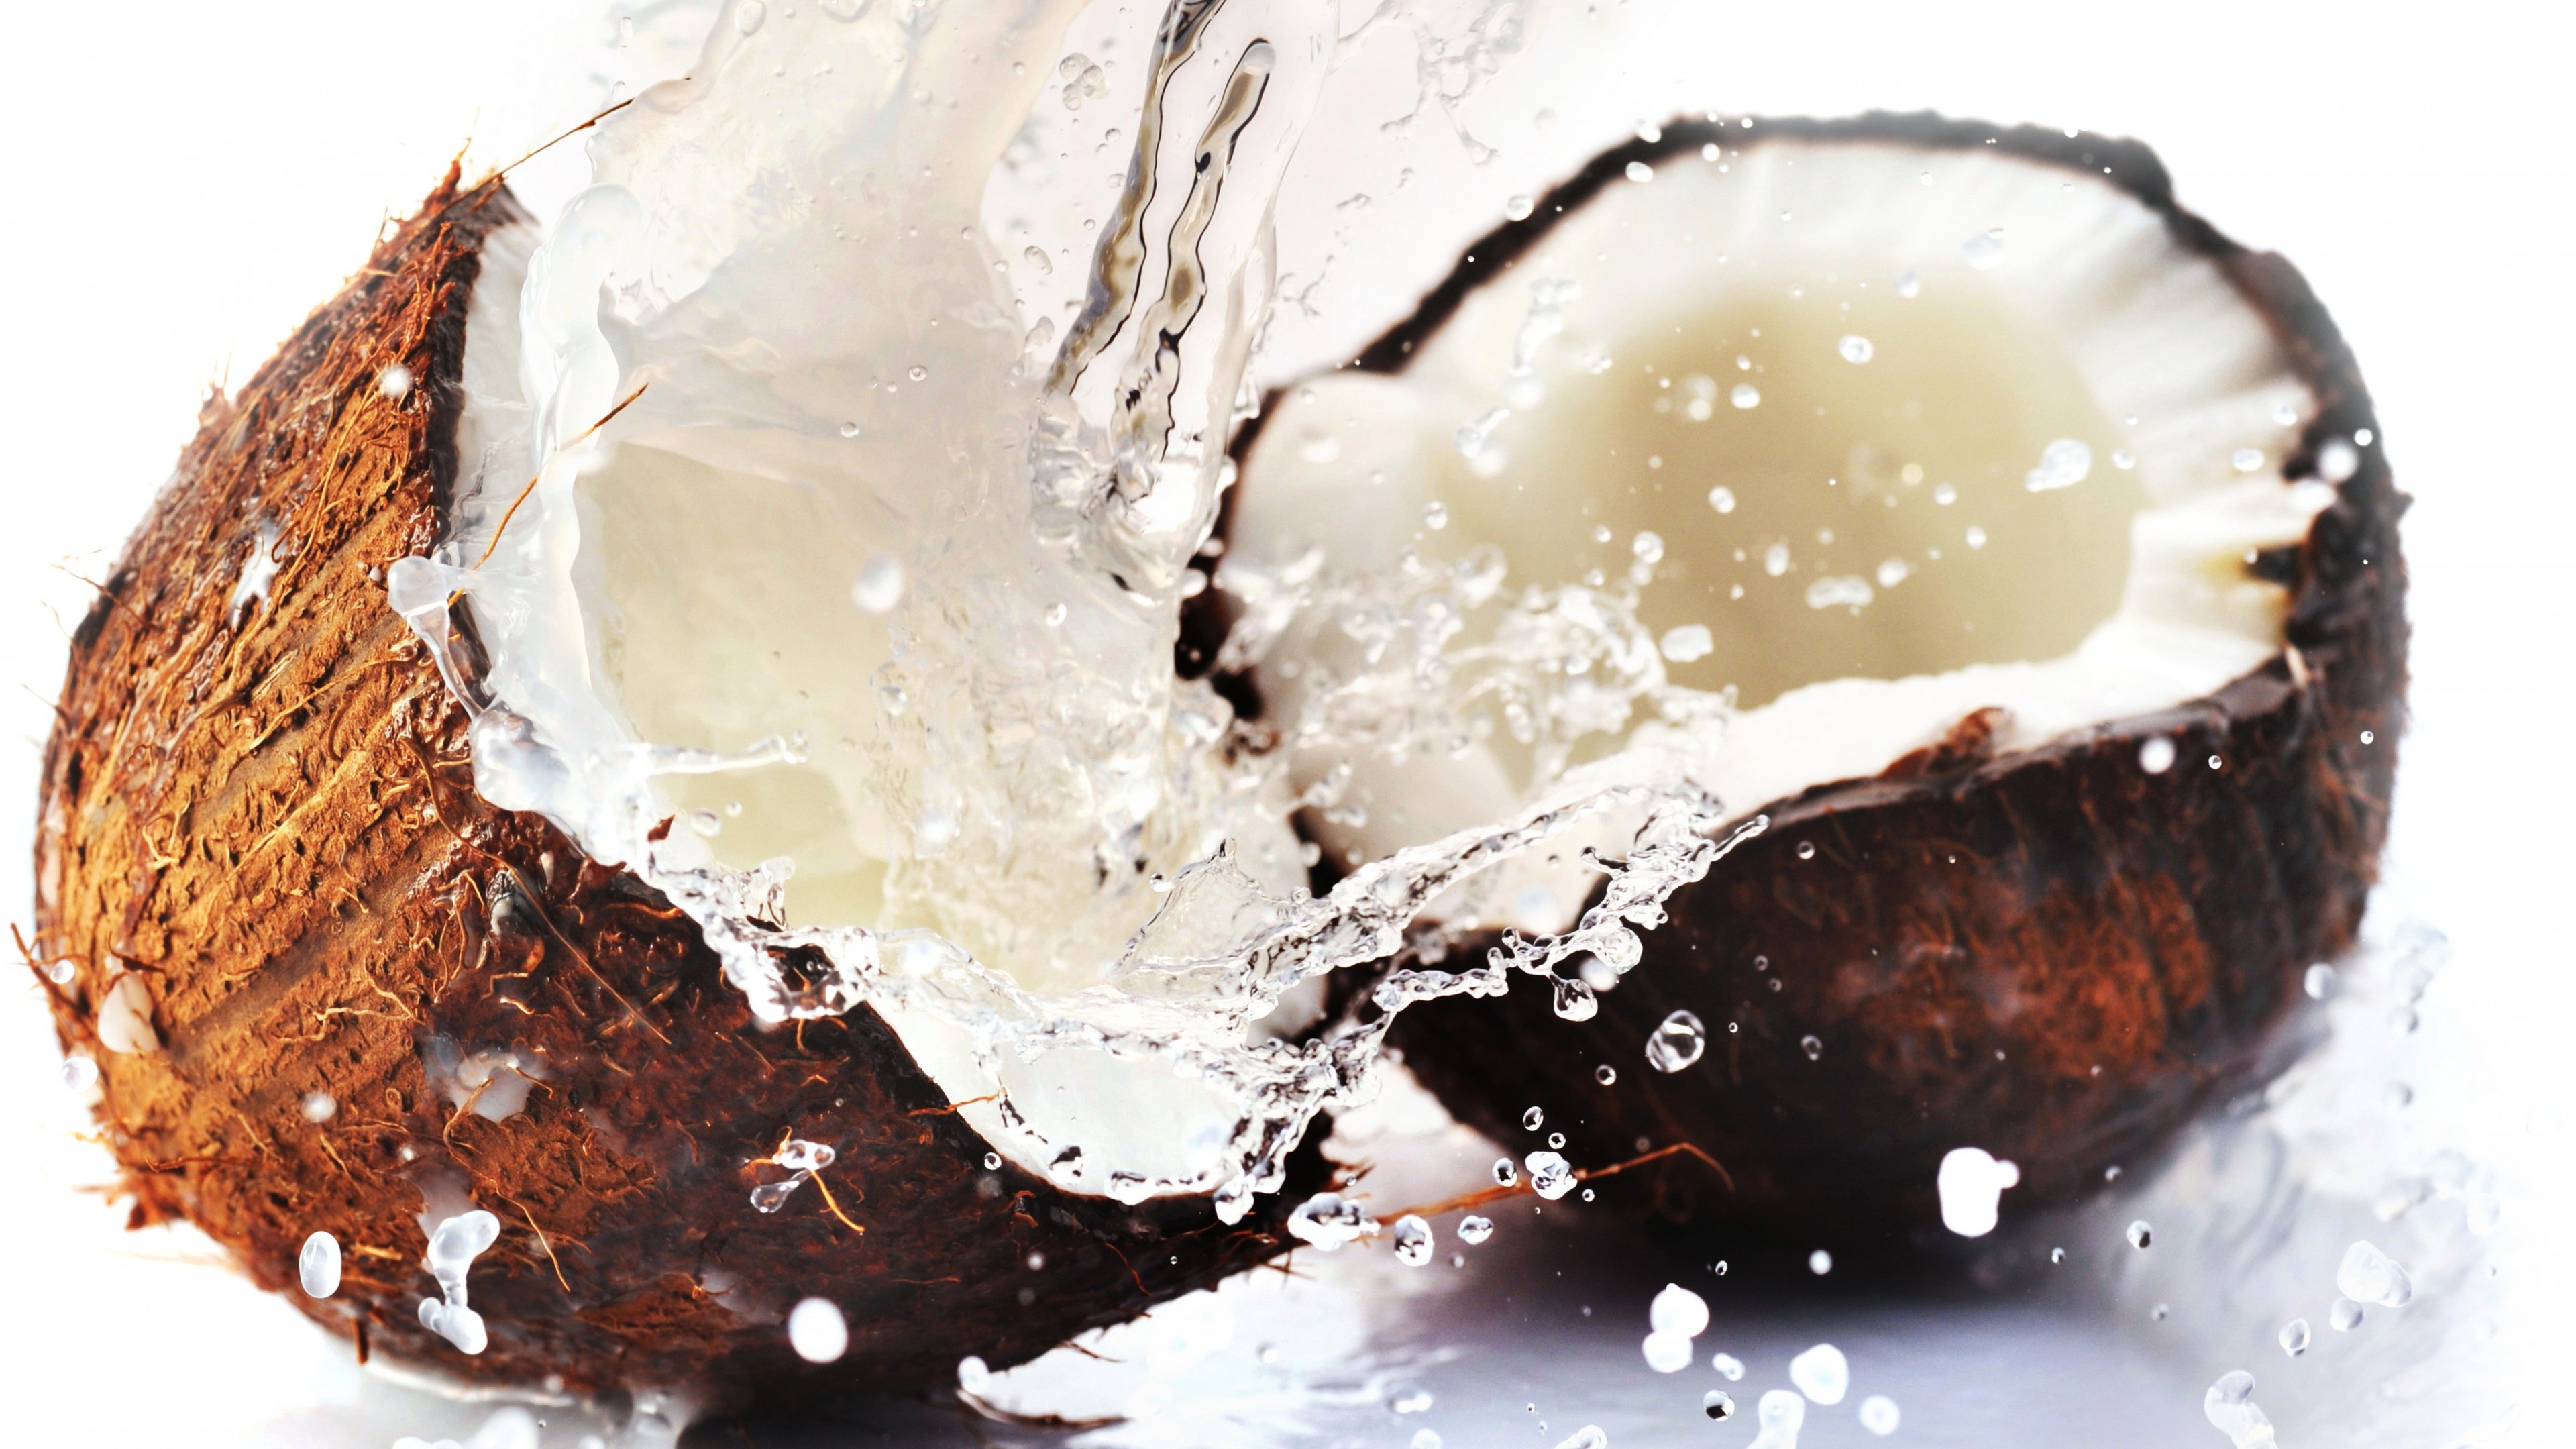 Coconut: A fibrous one-seeded drupe, also known as a dry drupe. 3840x2160 4K Wallpaper.